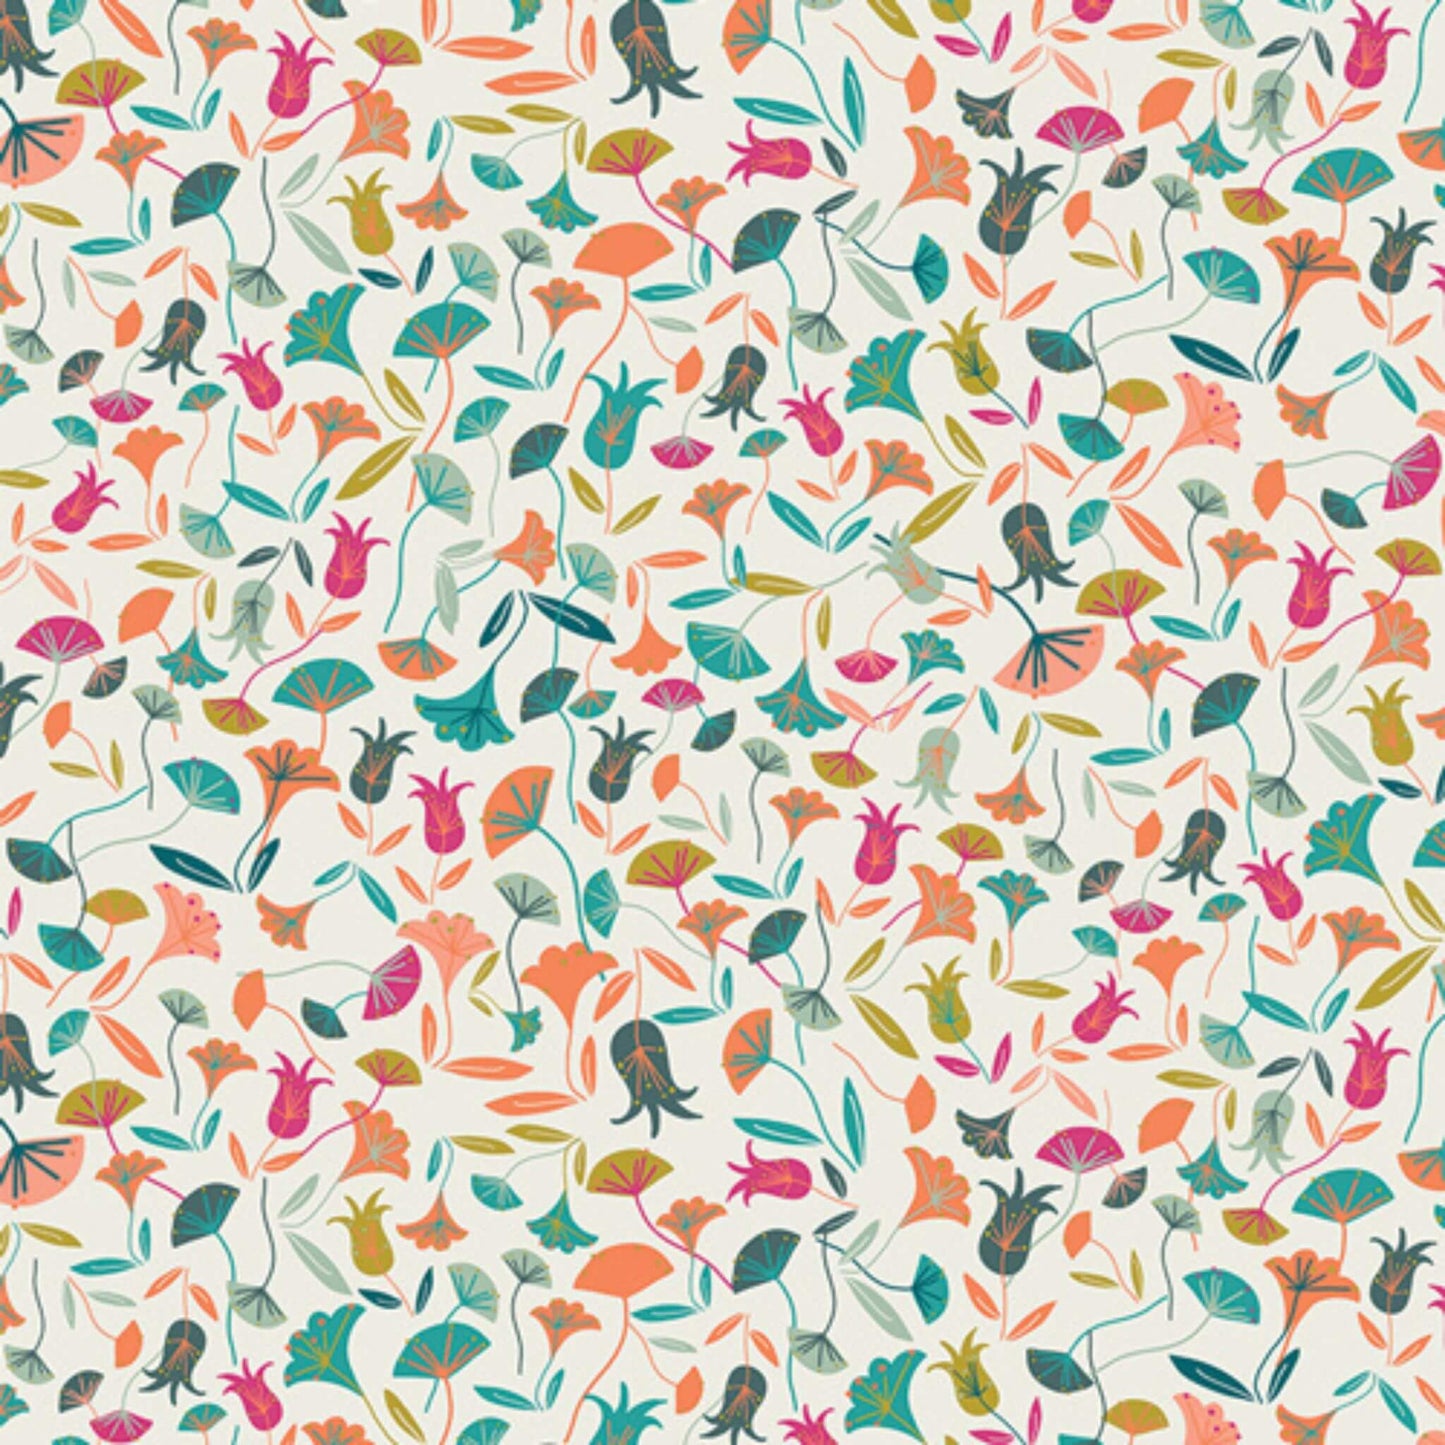 Wildseed Eight - Path to Discovery Fabric Range - Jessica Swift for Art Gallery Fabrics (AGF)